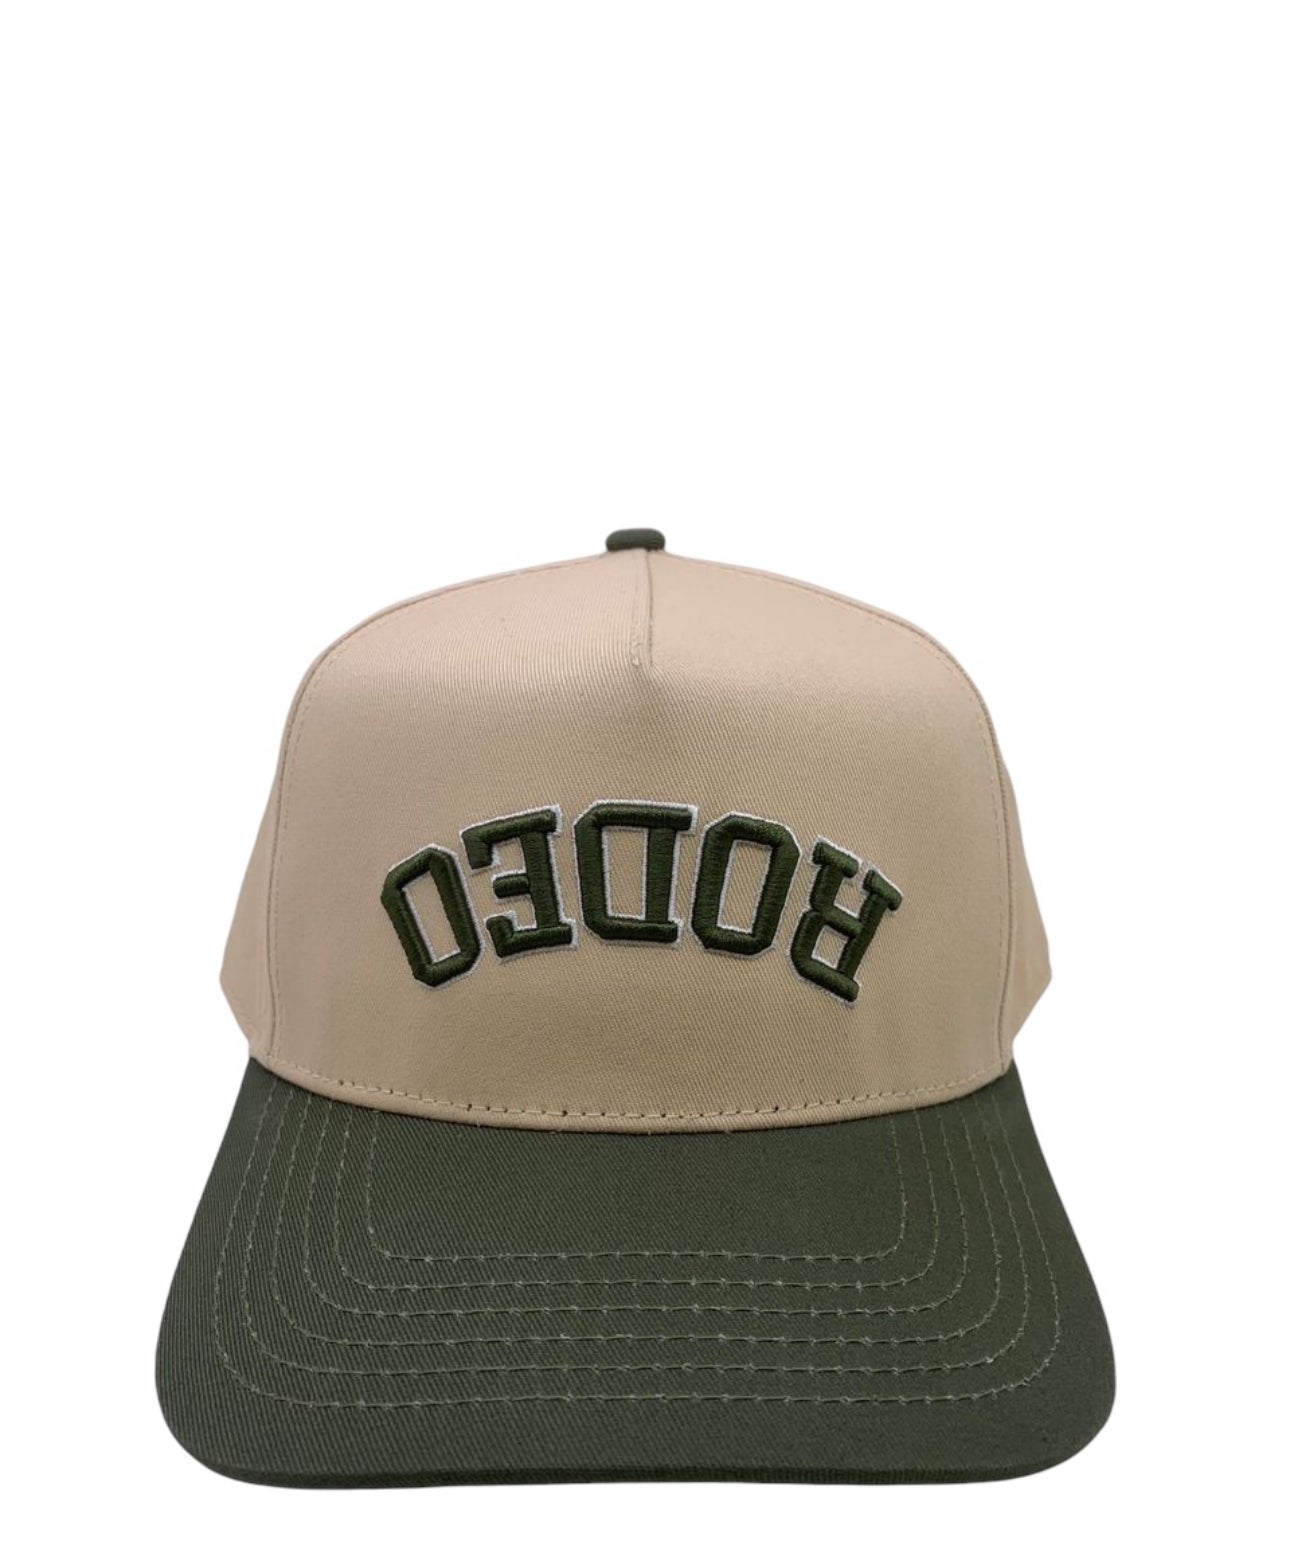 “Rodeo” Hat